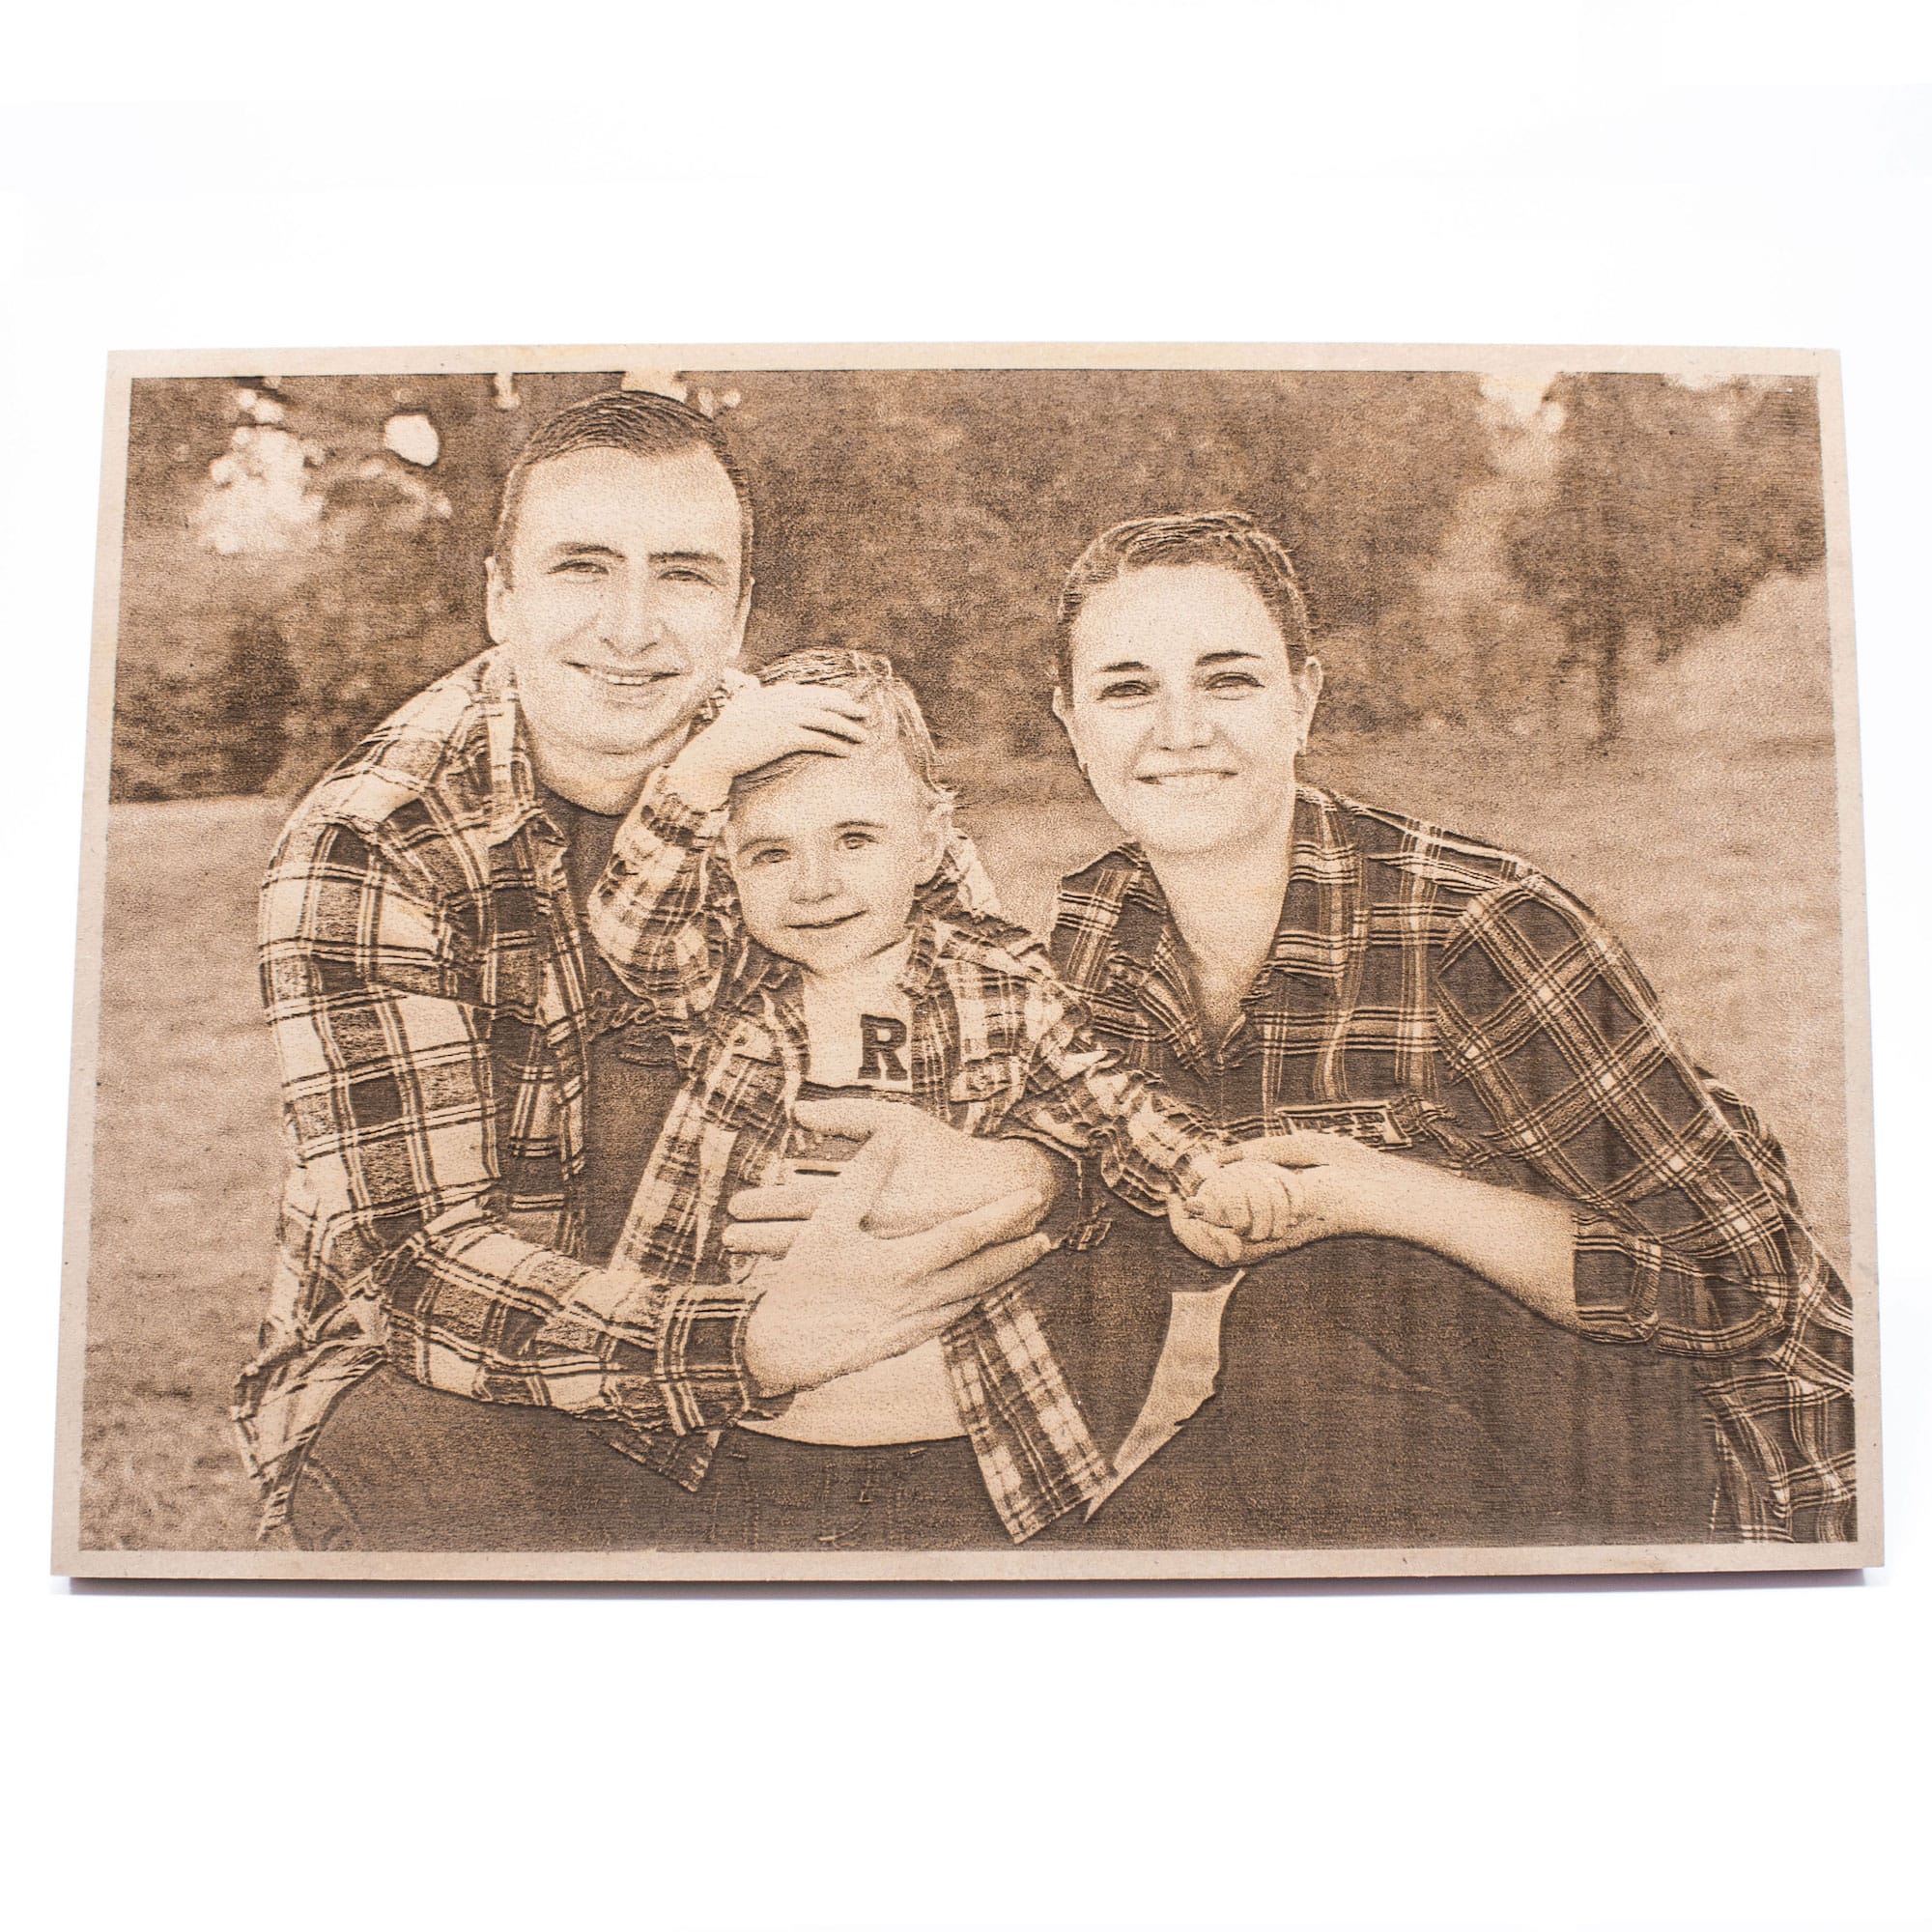 Woodprint of a personal photo